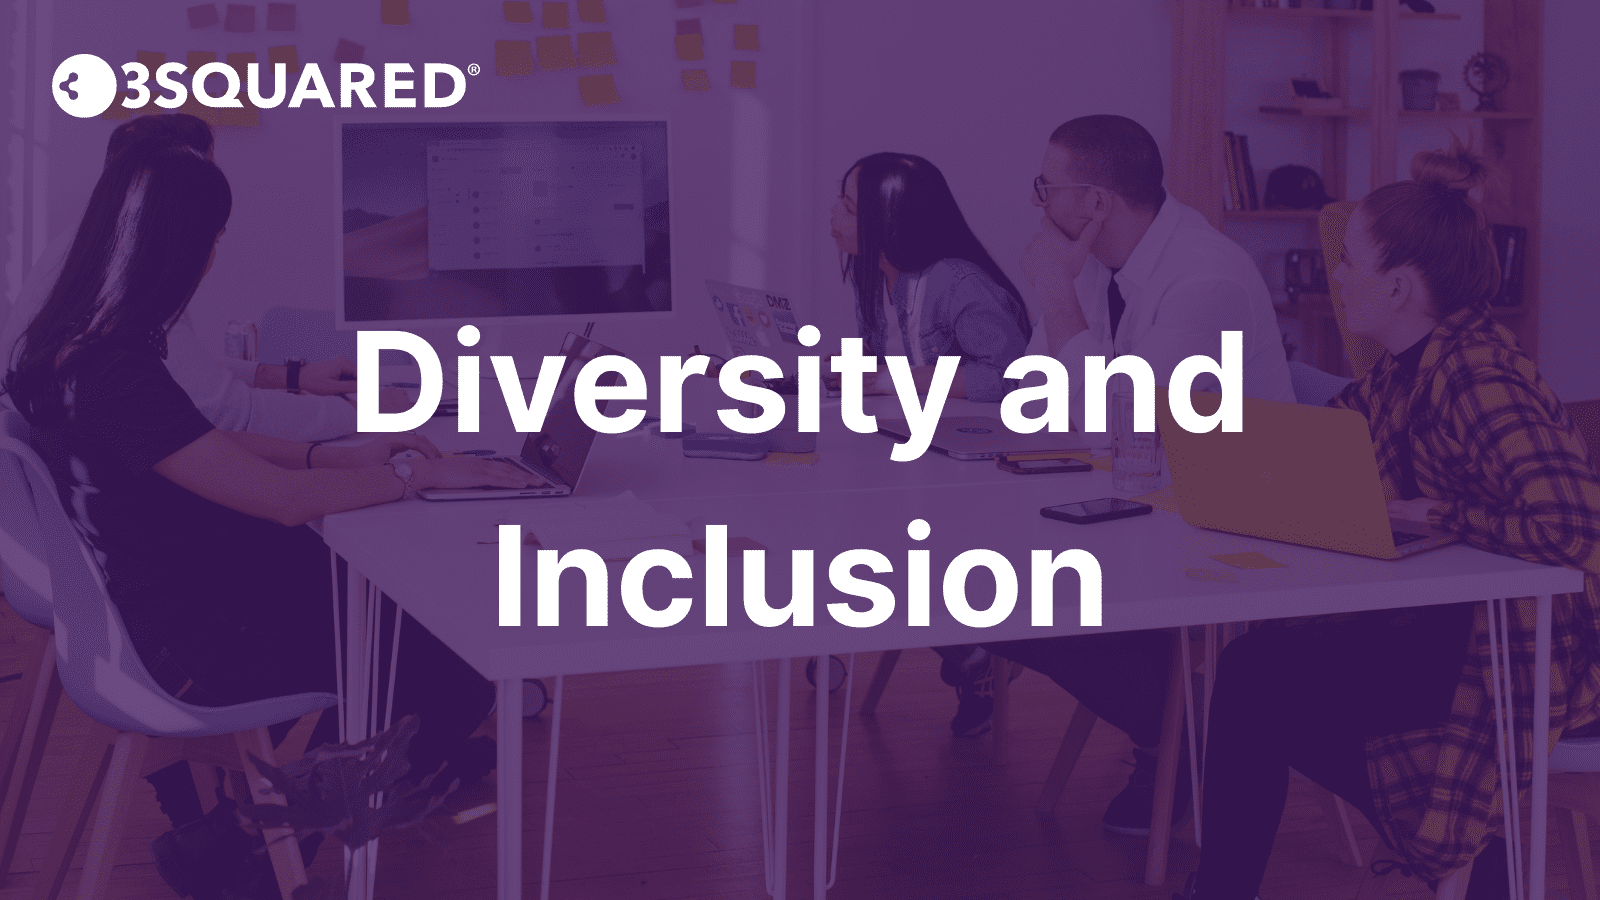 3Squared diversity and inclusion